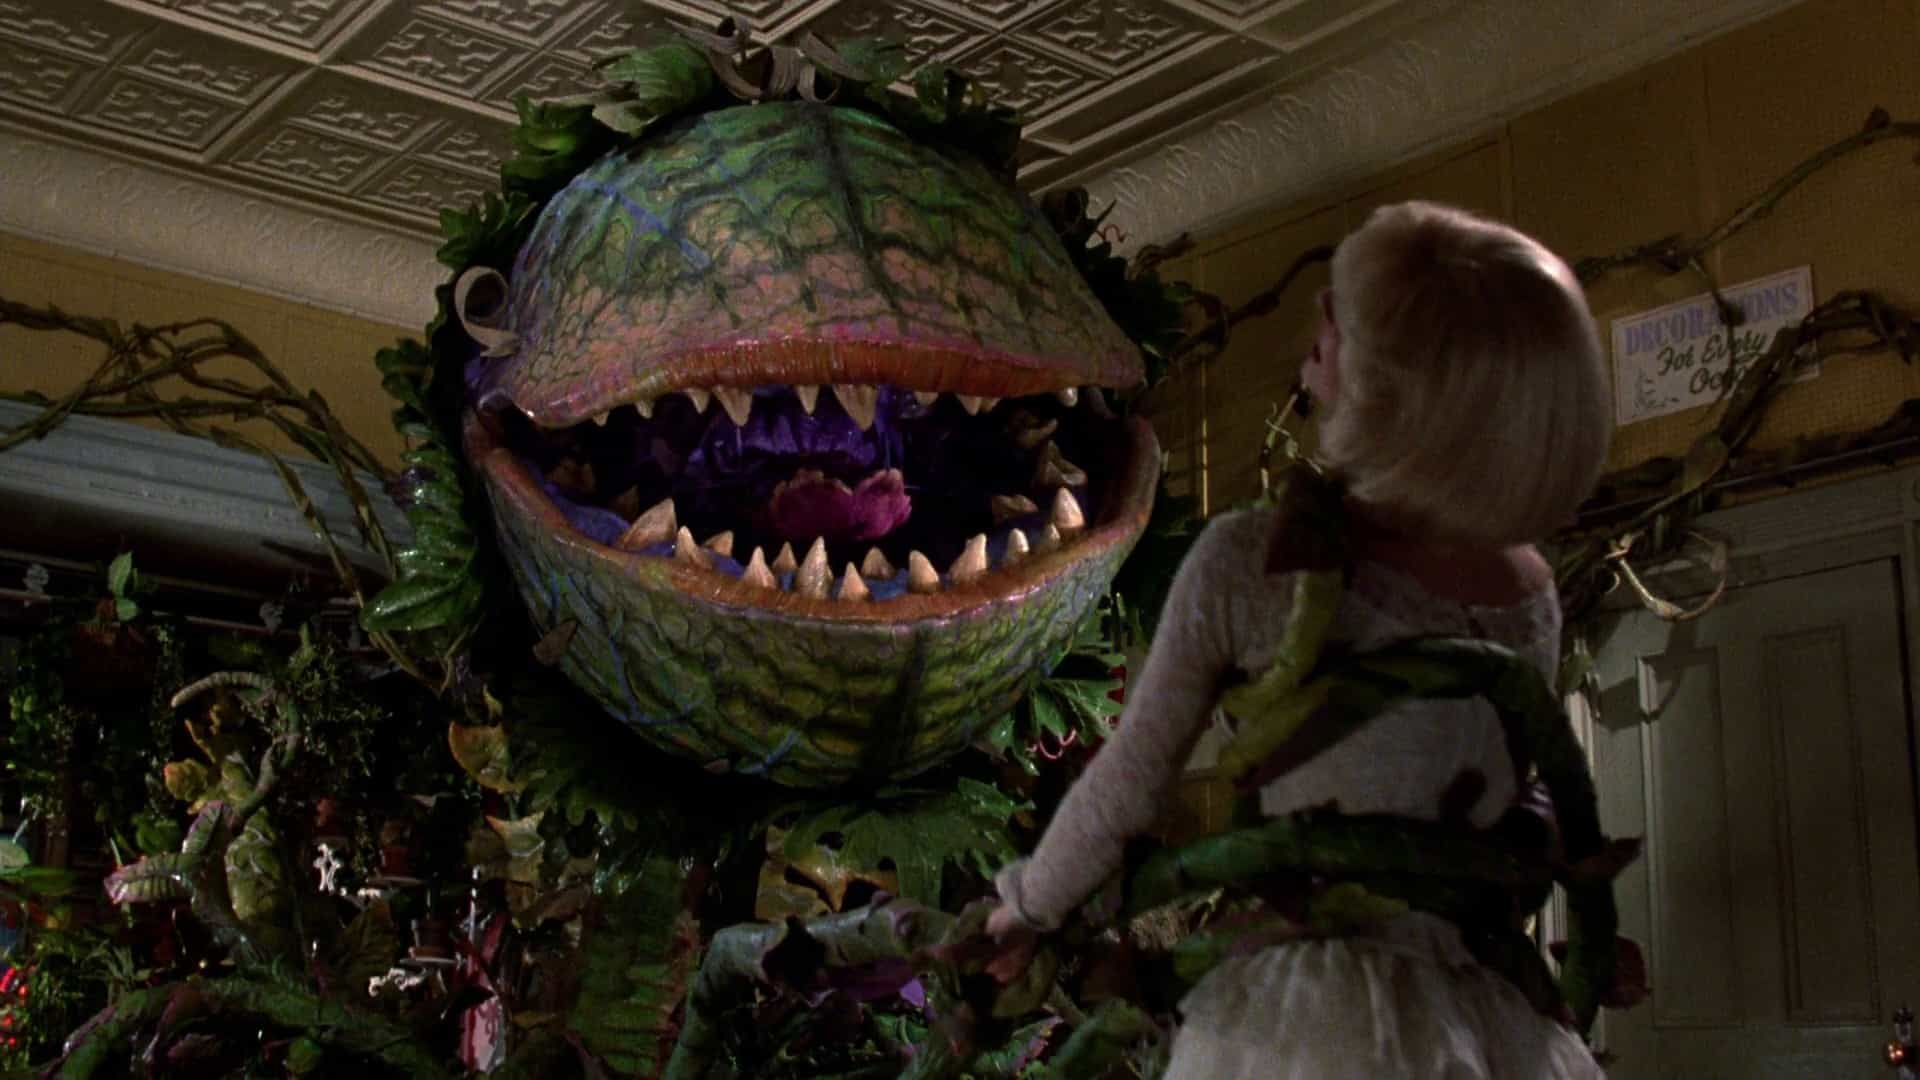 Movie: Little Shop of Horrors